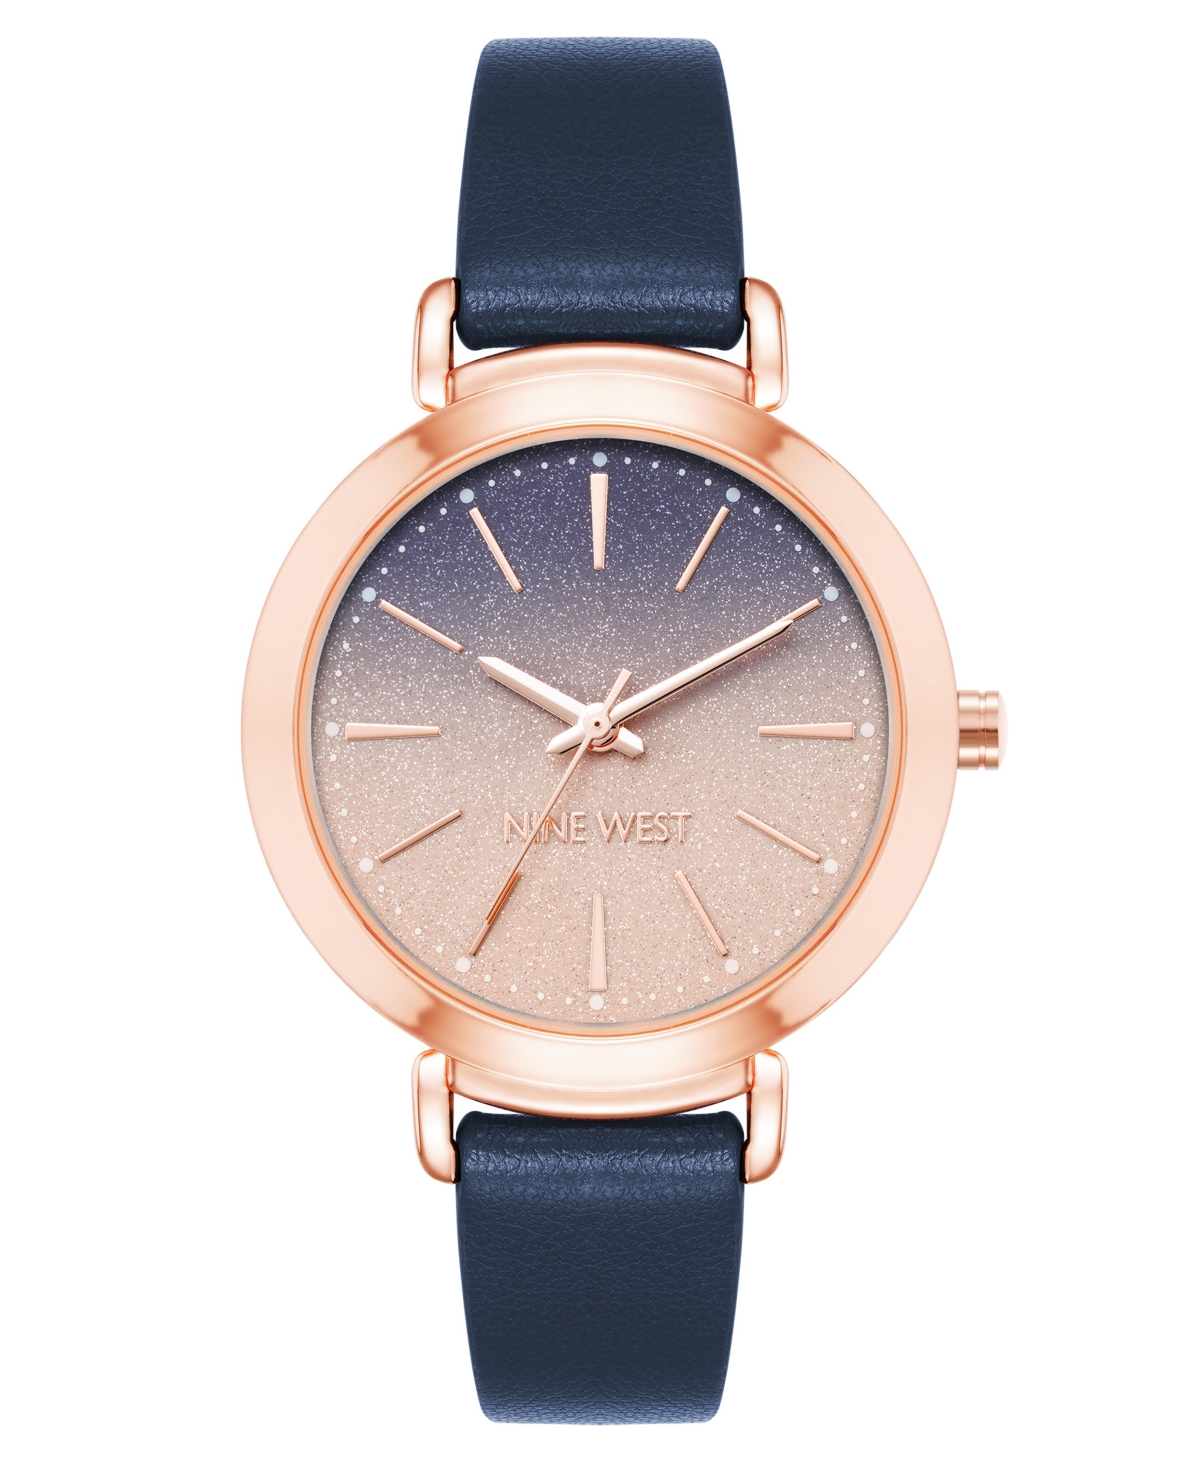 Nine West Women's Quartz Navy Faux Leather Band Watch, 36mm In Navy,rose Gold-tone